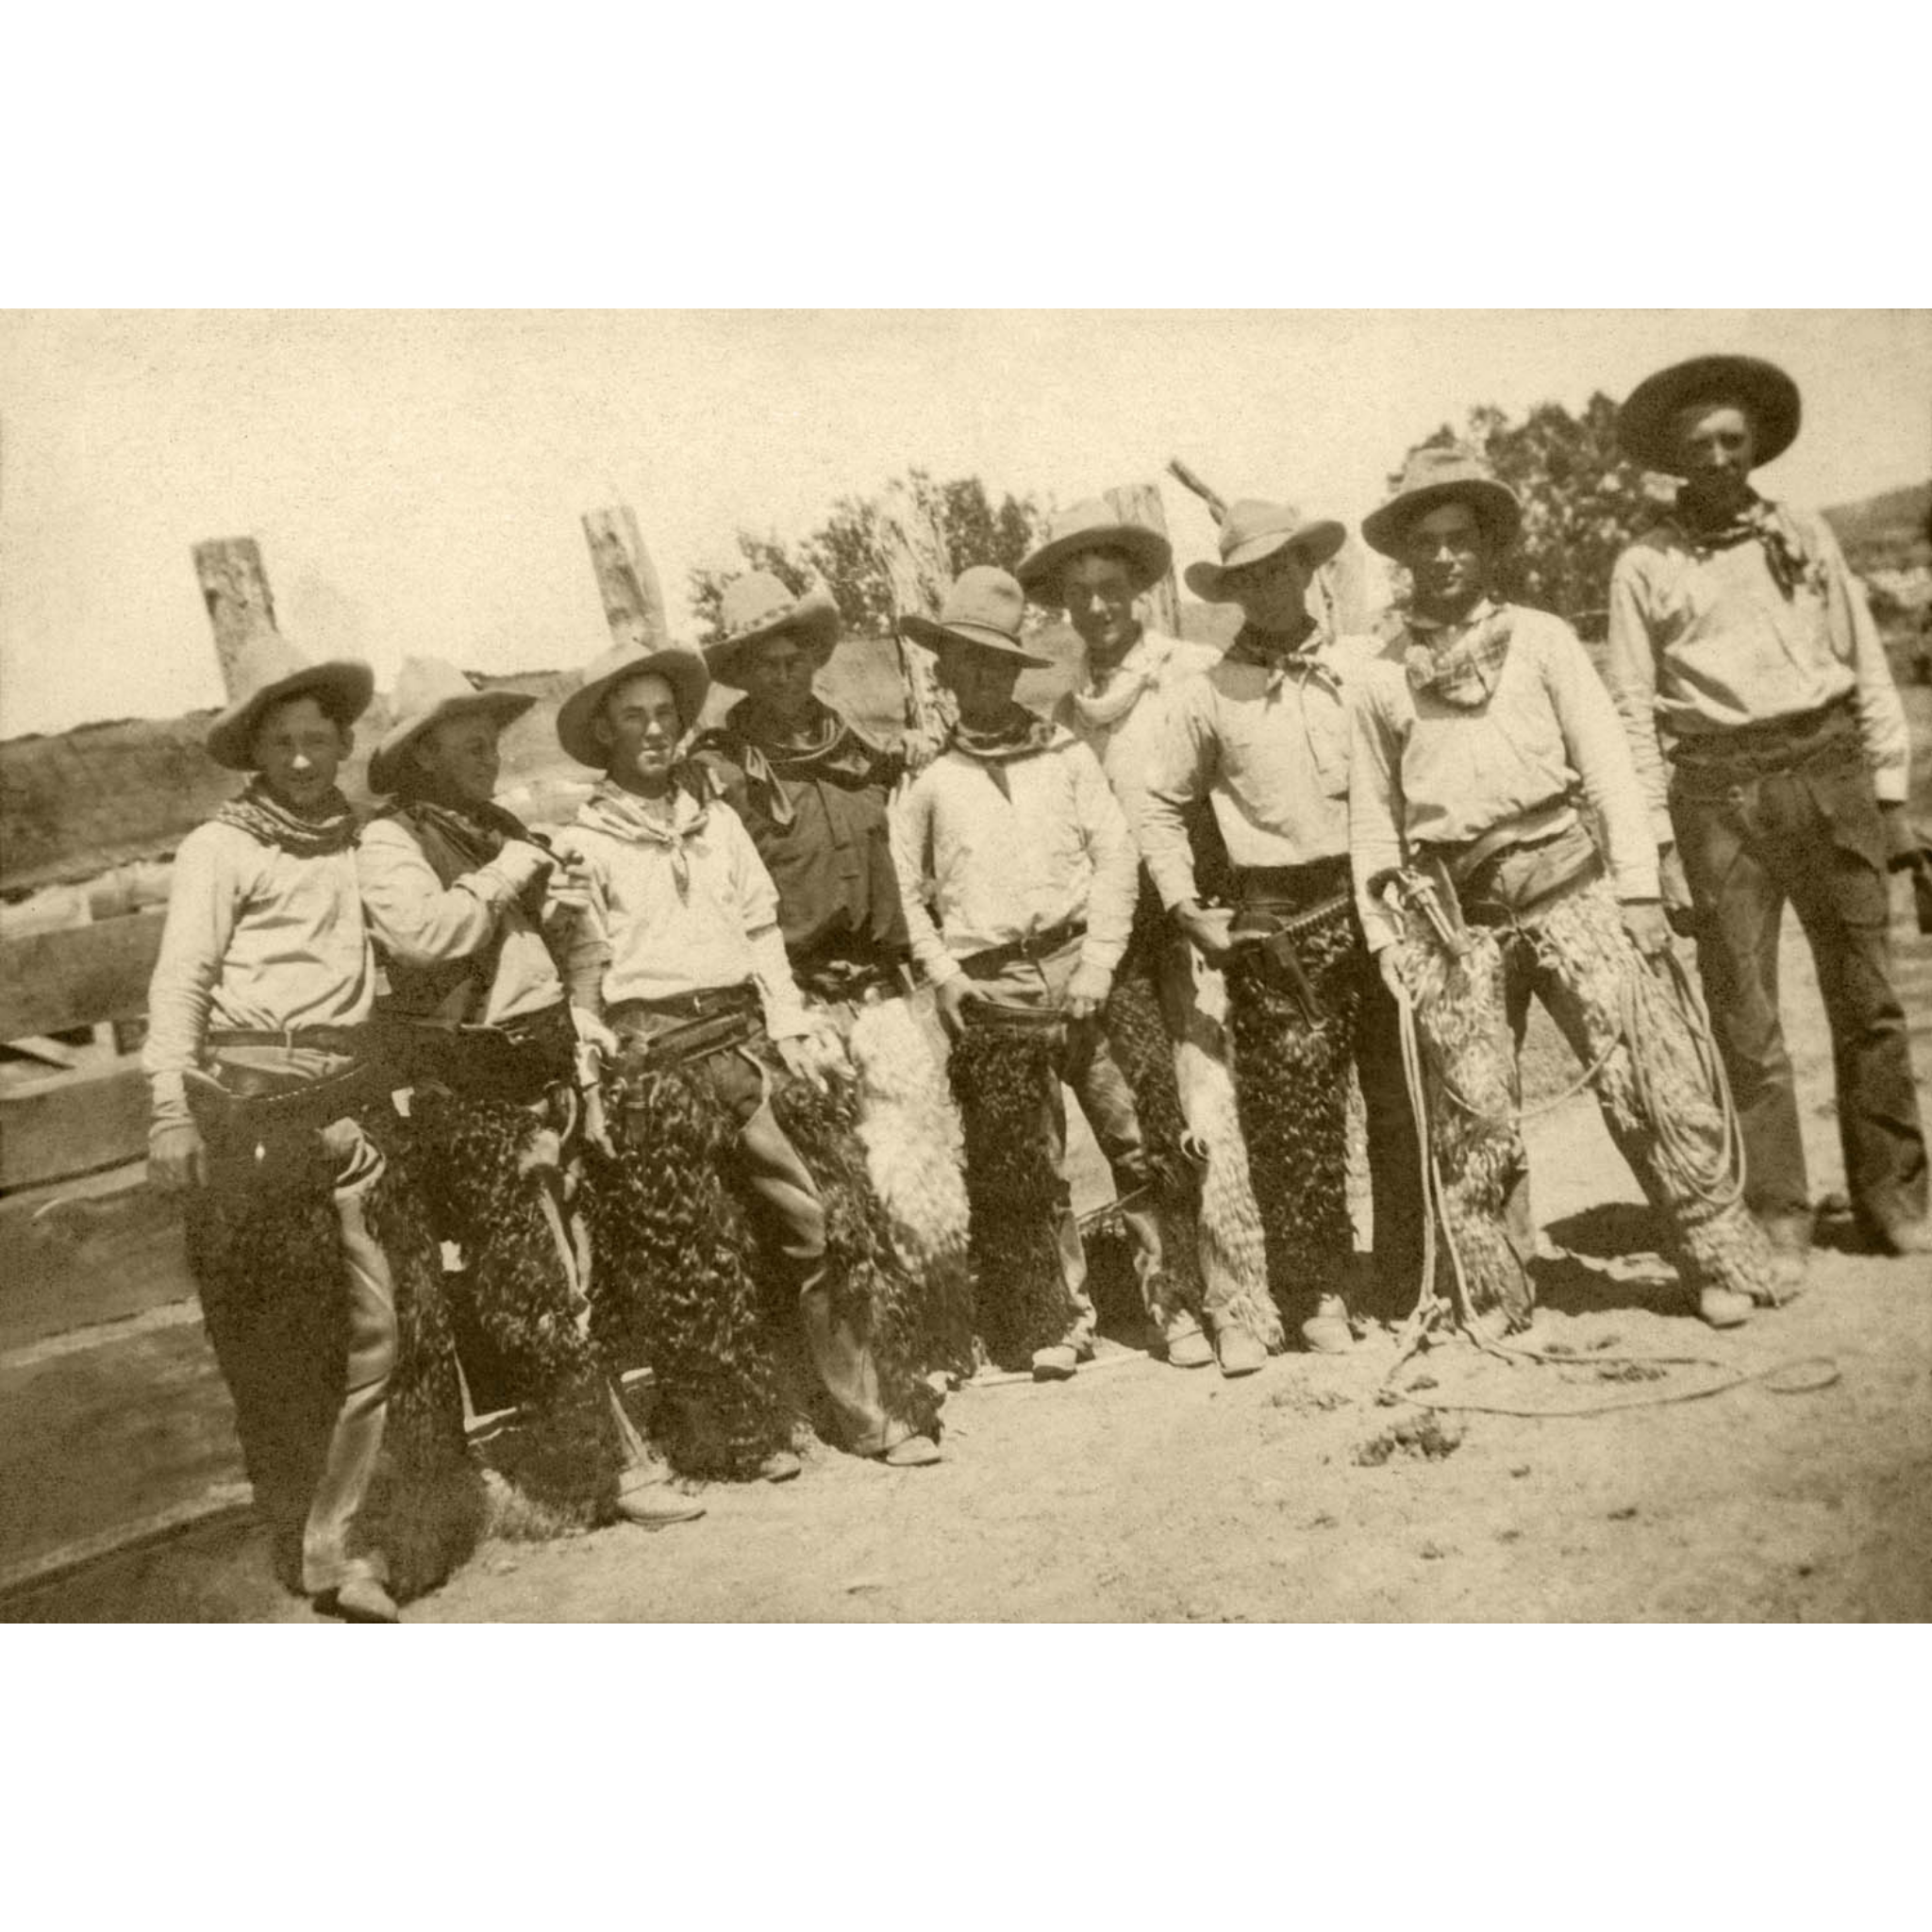 Montana Cowboys Wearing Wooly Chapps - ca. 1930 Photograph